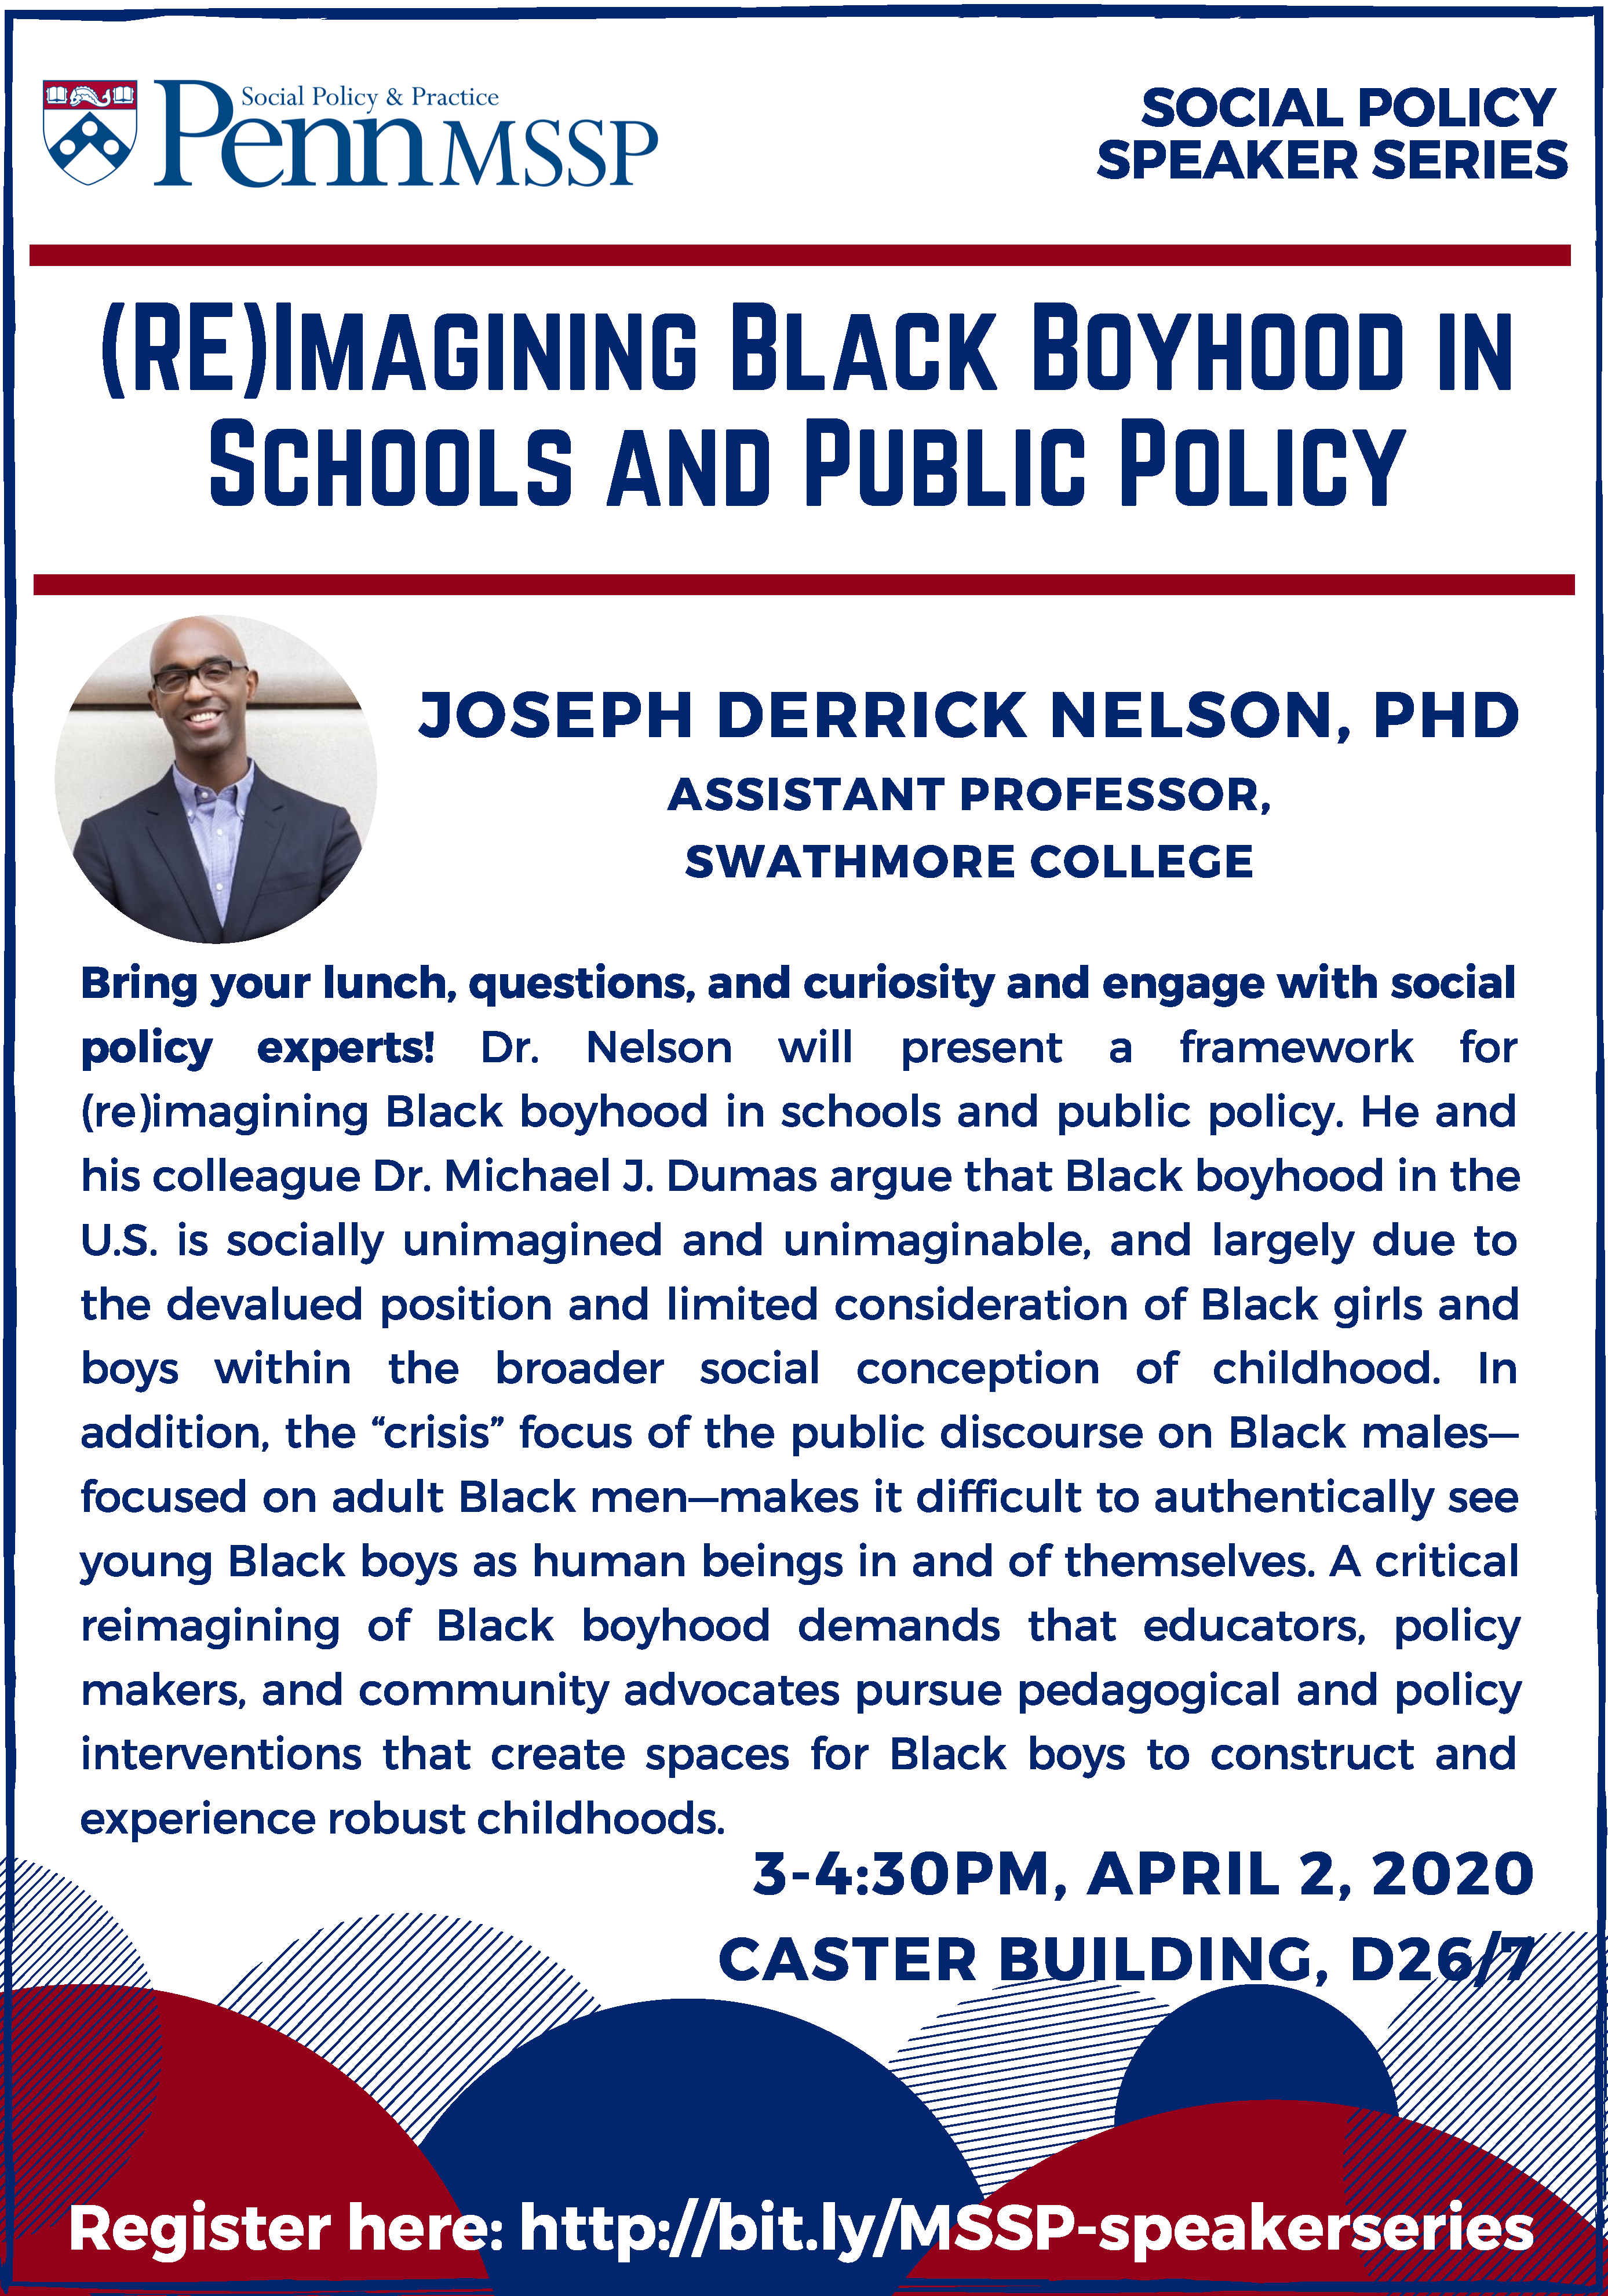 Social Policy Speaker Series event flyer